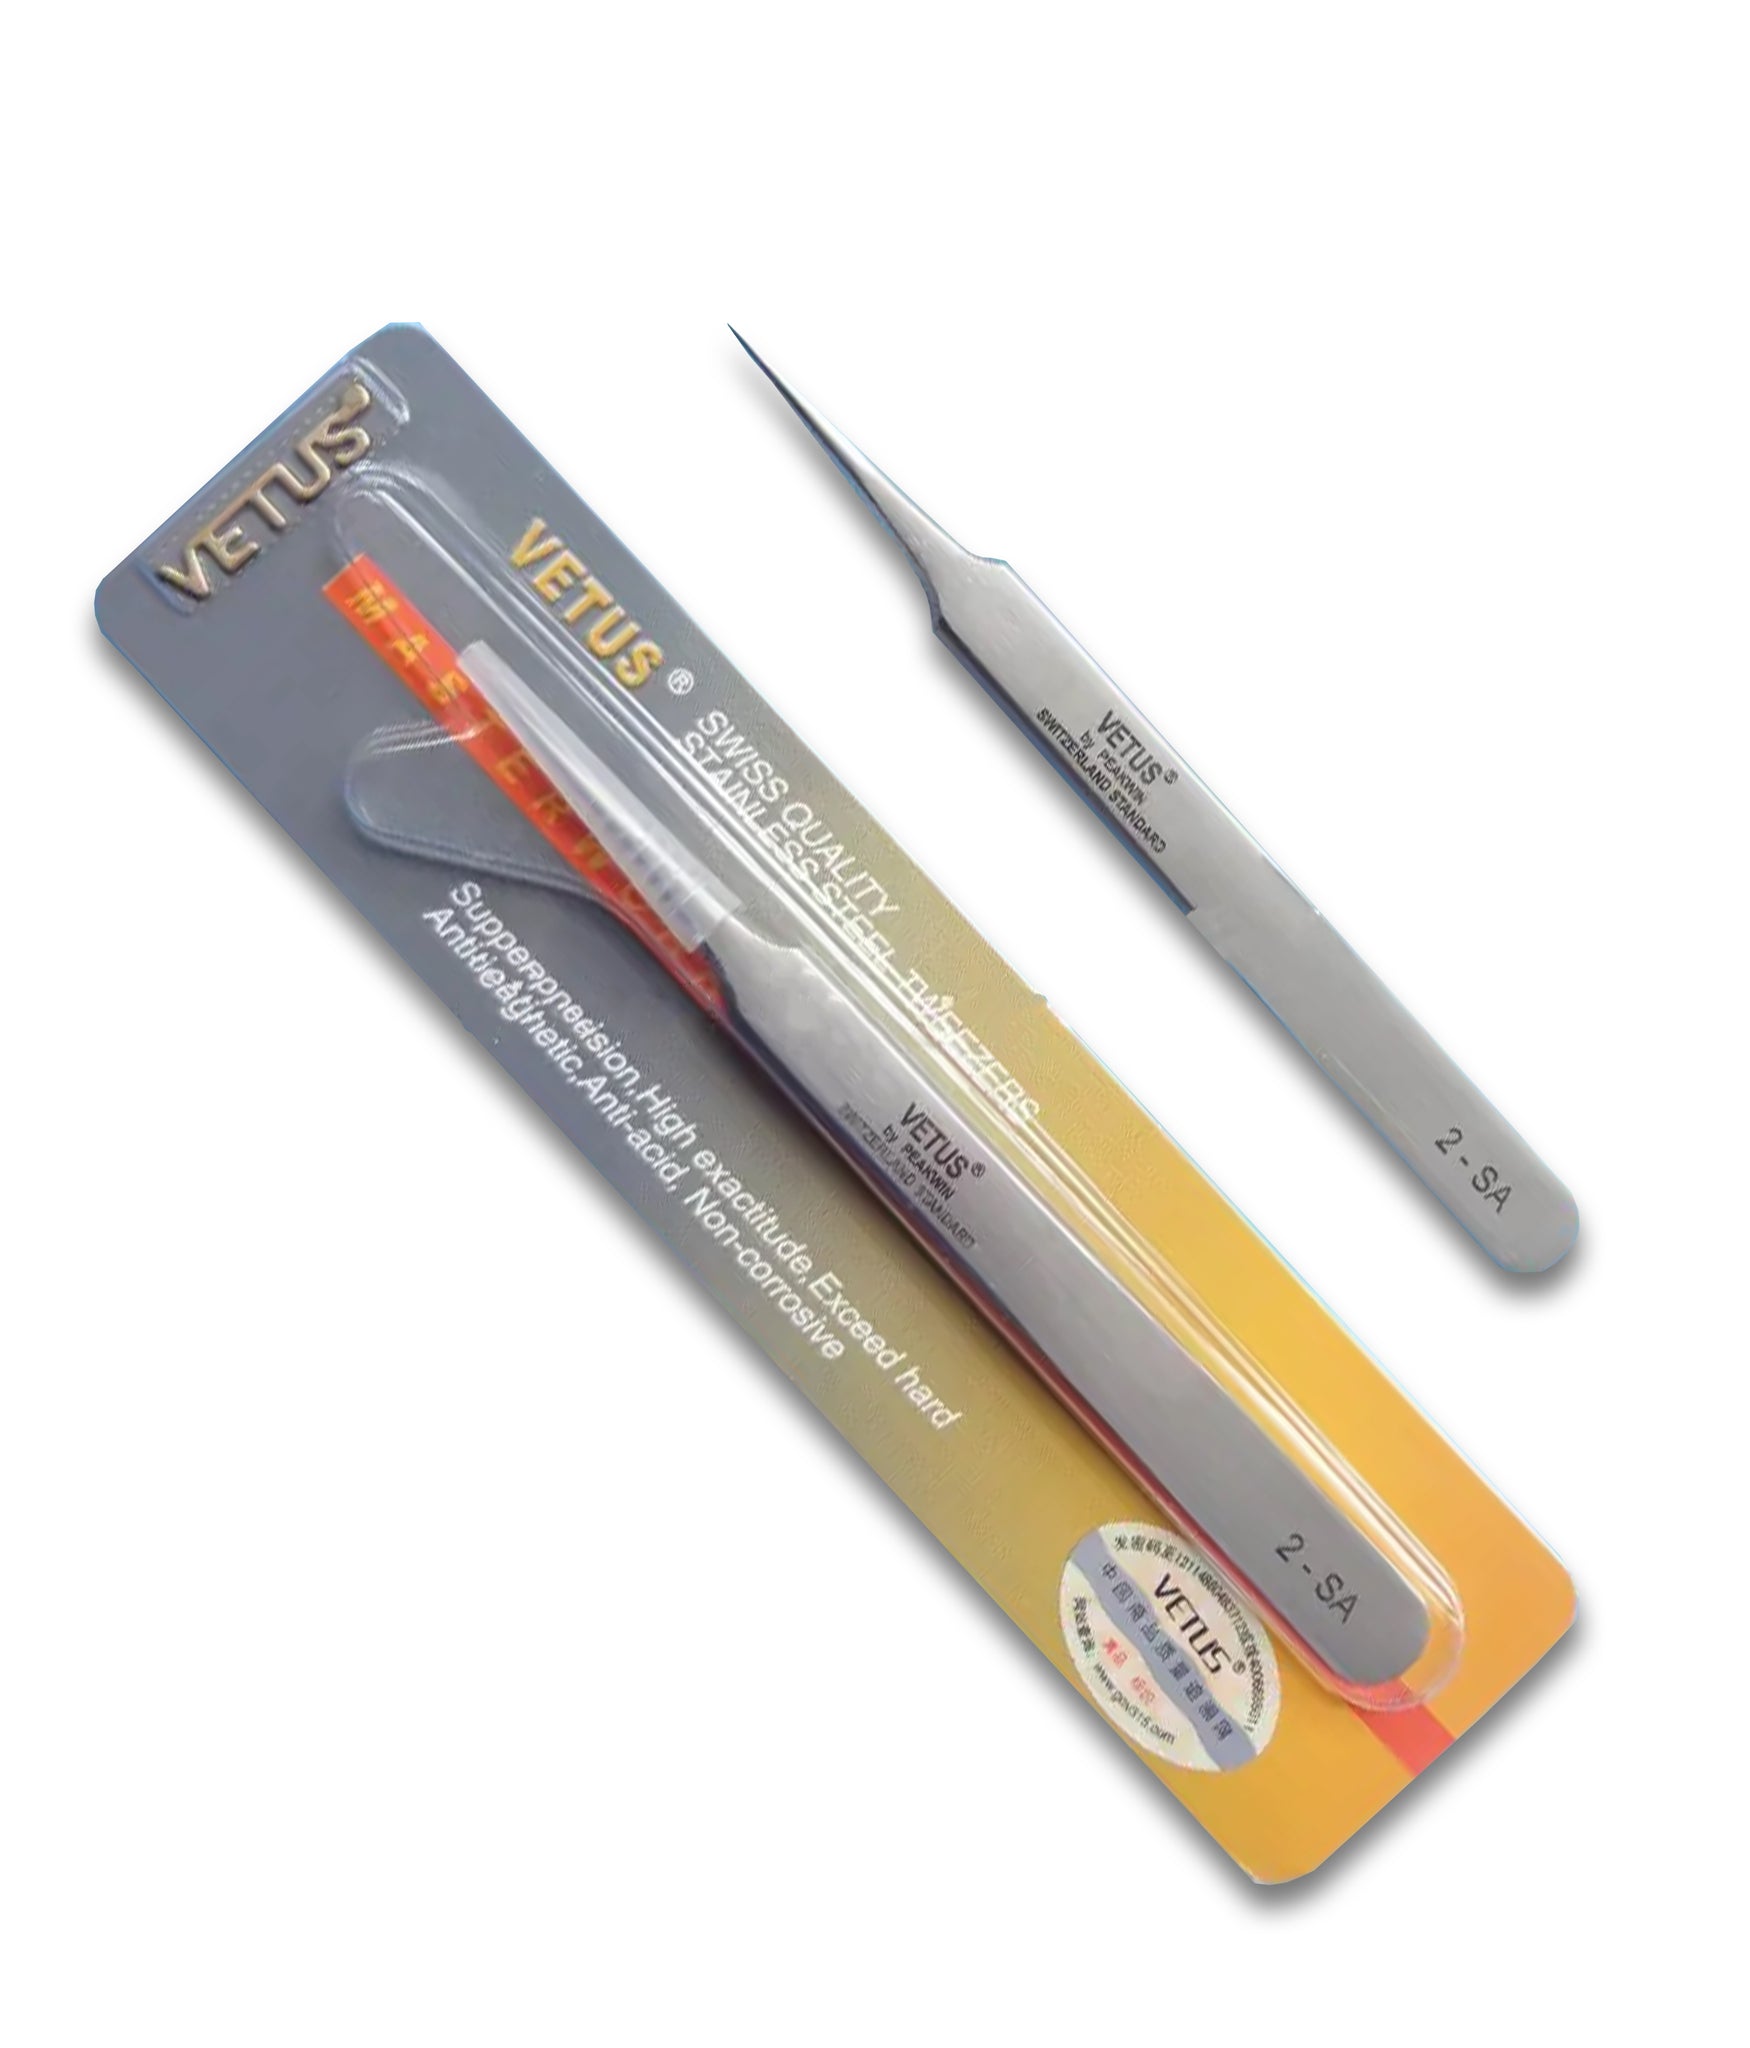 Vetus 2-SA A-Shape Tweezers for Isolation and Classic Eyelash Extensions